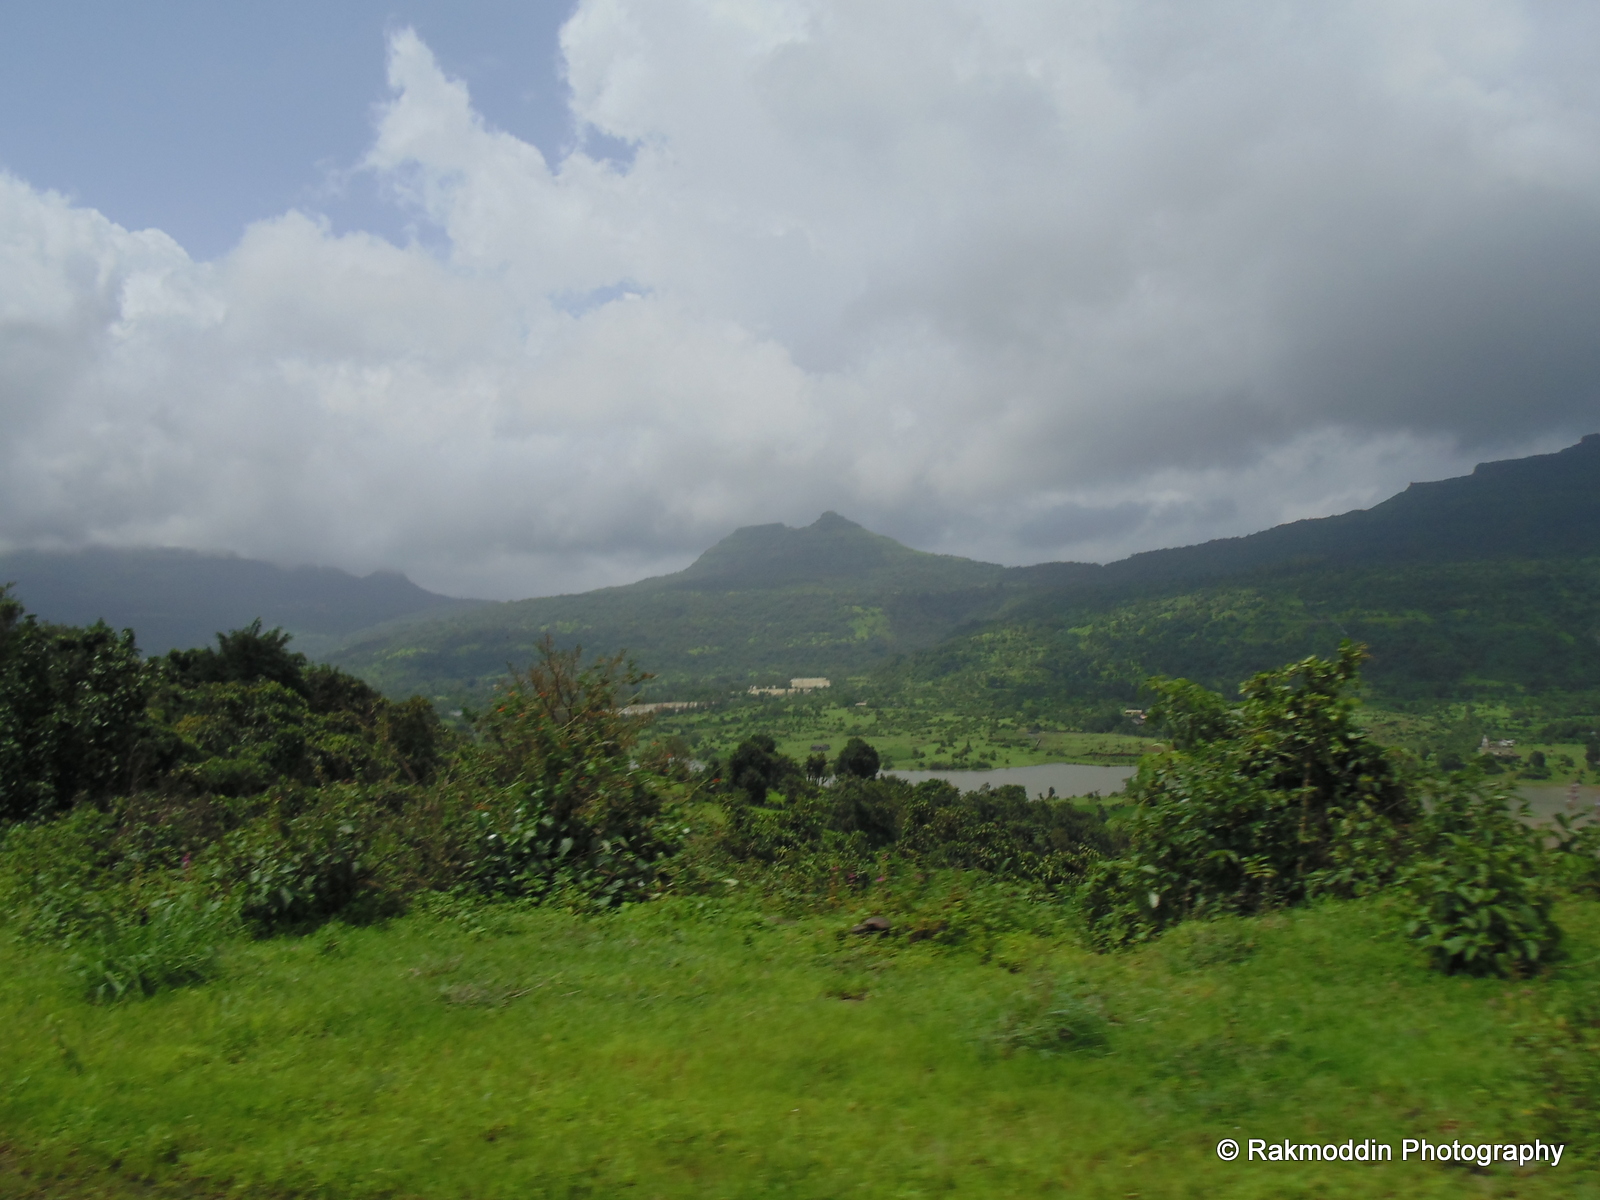 Scenic views on the way to aamby valley via tikona fort road